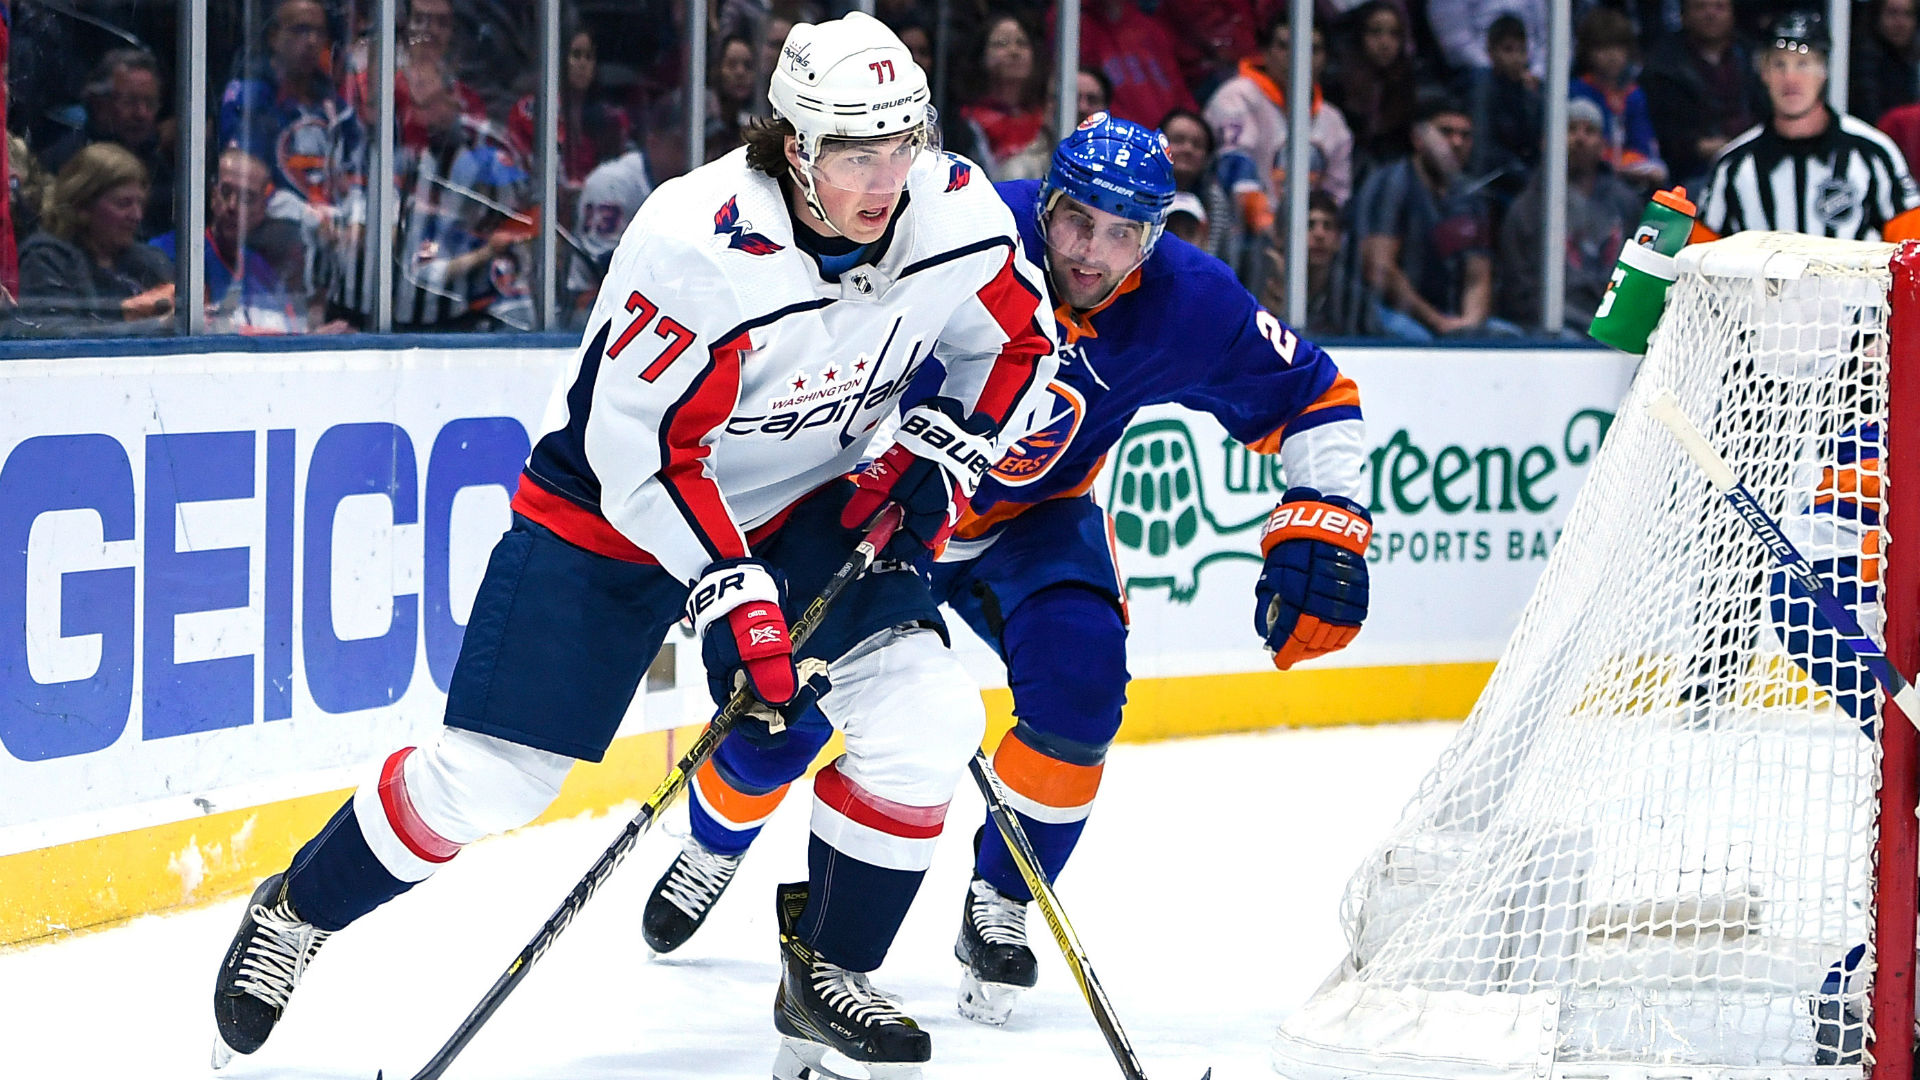 Ovechkin's 2 Goals Aren't Enough as Caps Fall in Game 2 to Islanders